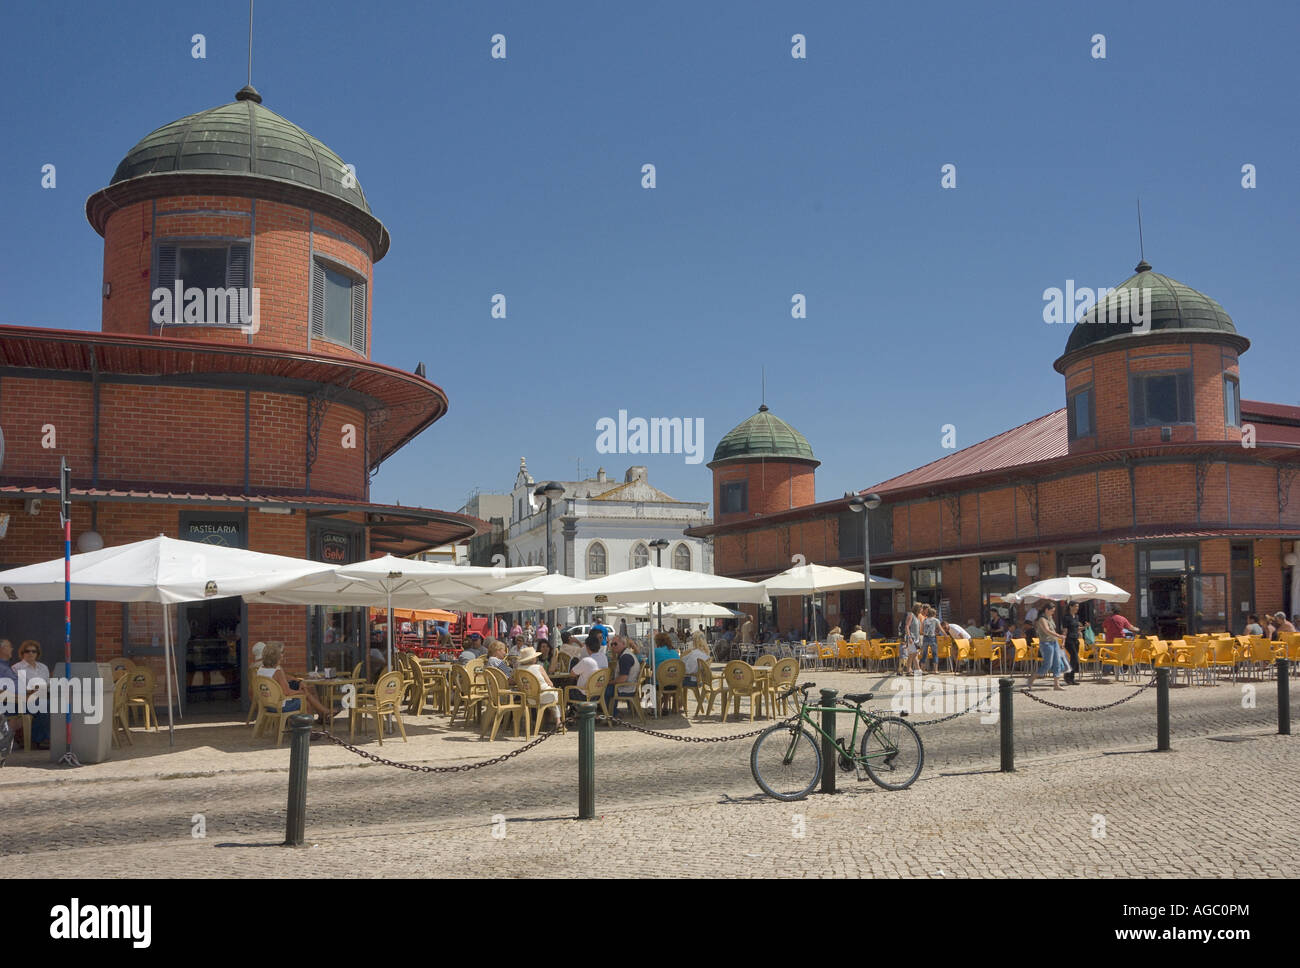 Eastern Algarve, Olhao The Old Market Building Stock Photo